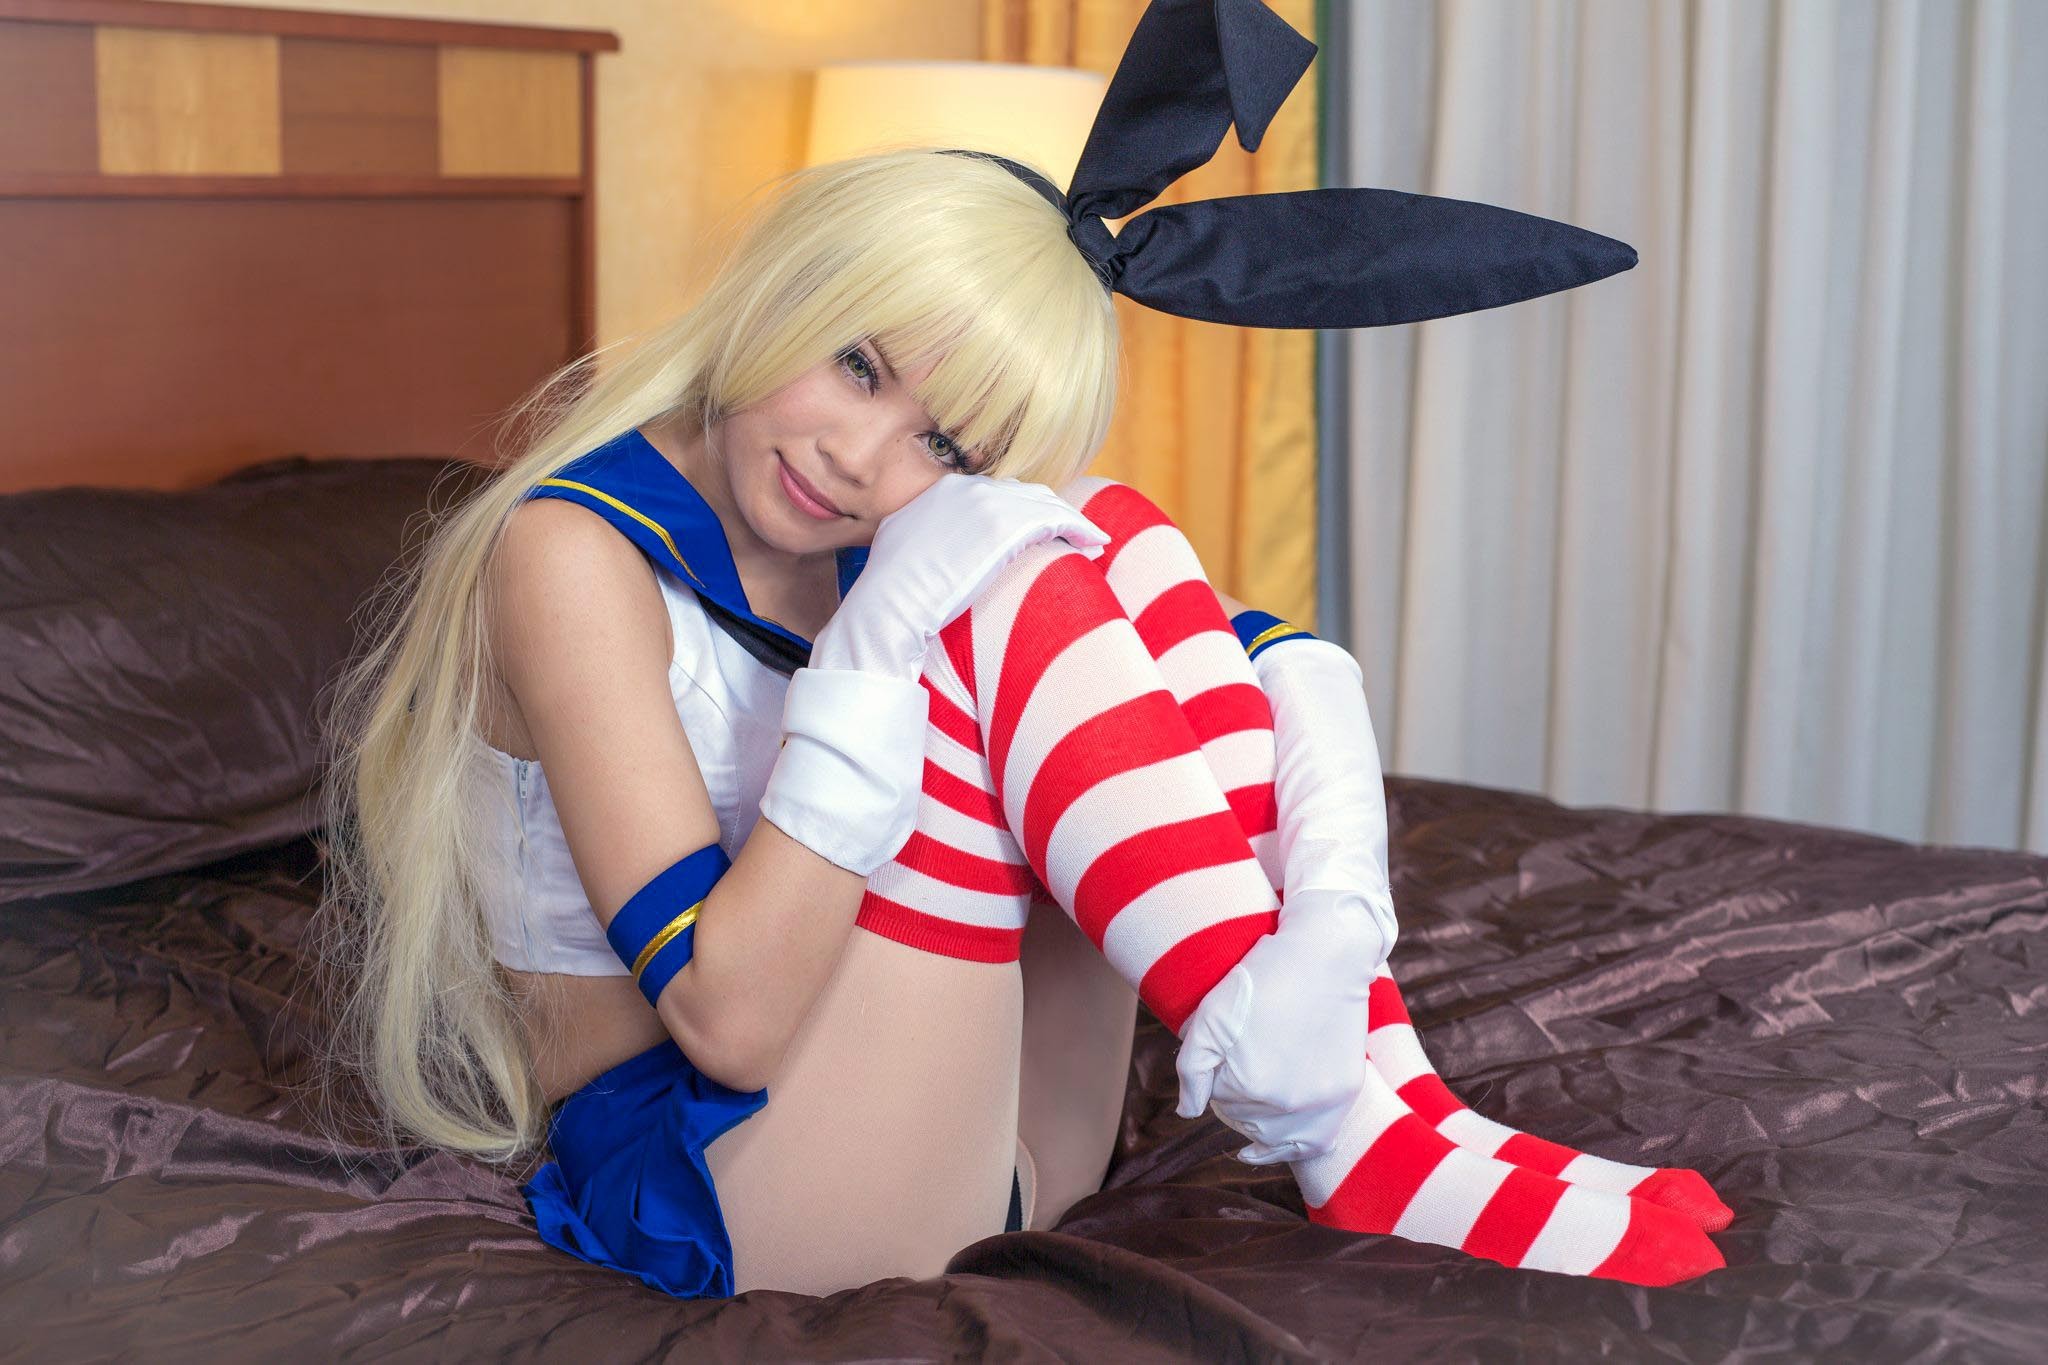 Cosplay Shimakaze Kancolle Women Blonde Bunny Ears Striped Stockings Thigh Highs In Bed 2048x1365